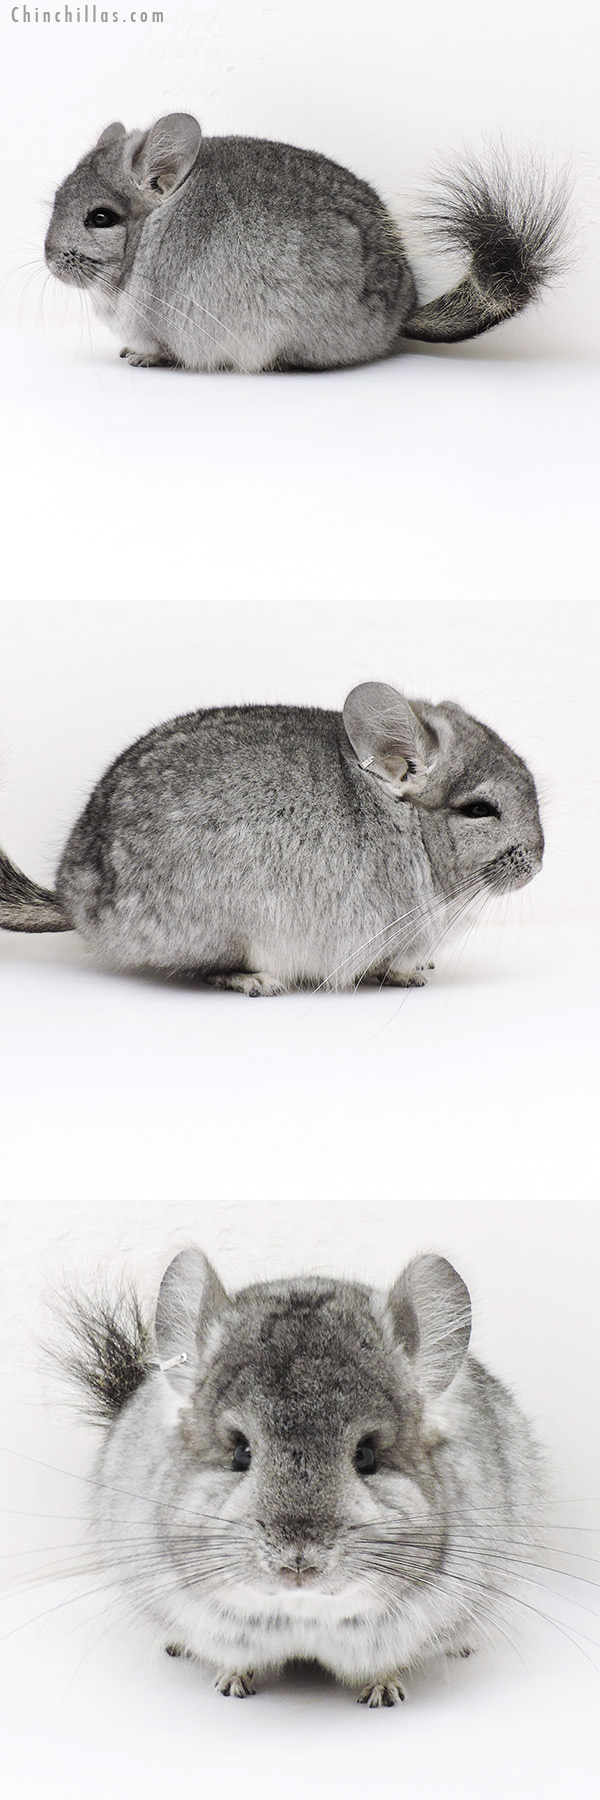 Chinchilla or related item offered for sale or export on Chinchillas.com - 17047 Standard  Royal Persian Angora Male Chinchilla